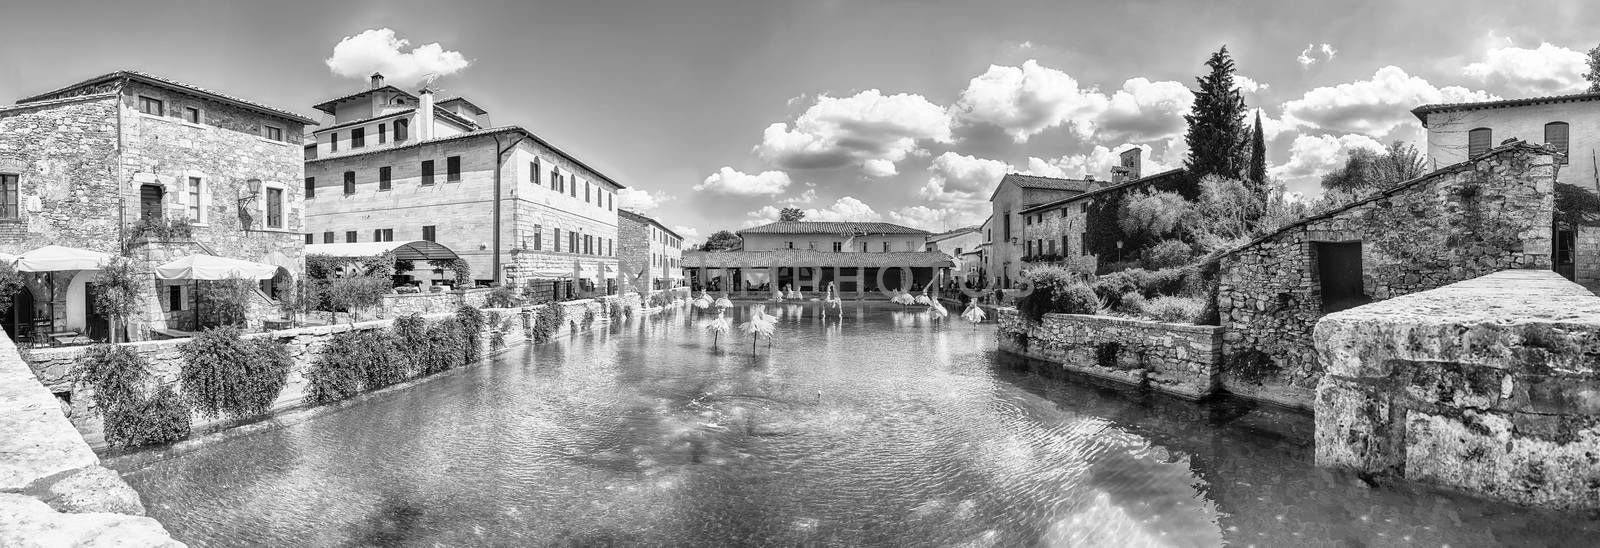 Medieval thermal baths in the town of Bagno Vignoni, Italy by marcorubino